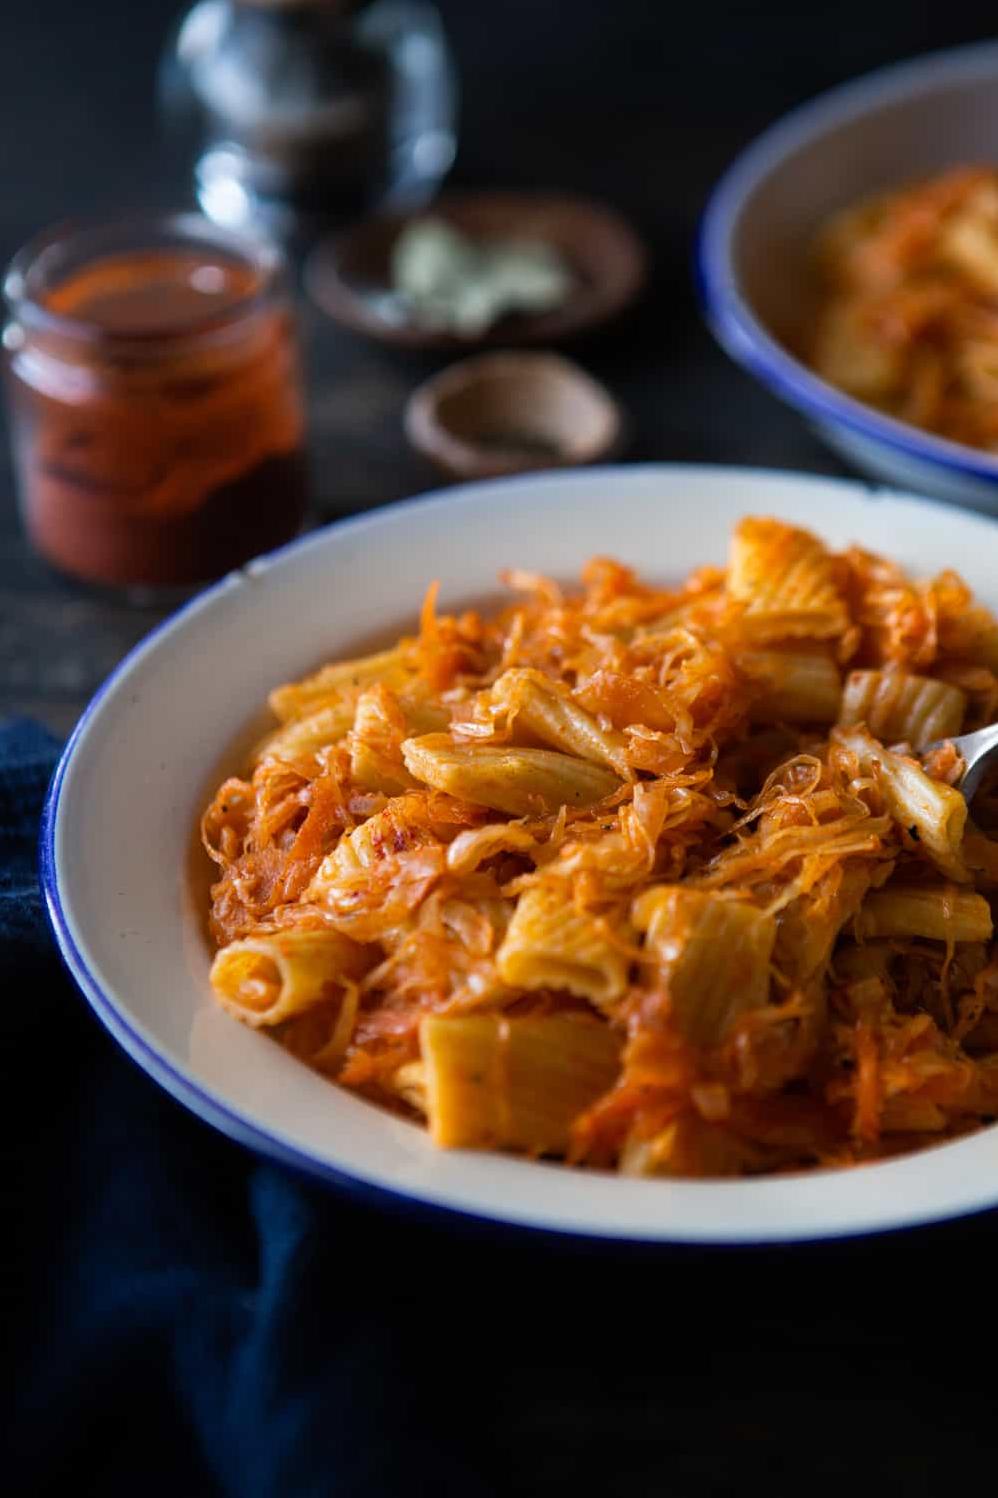  This sauerkraut and tomato pasta is a delicious way to sneak more fermented foods into your diet.